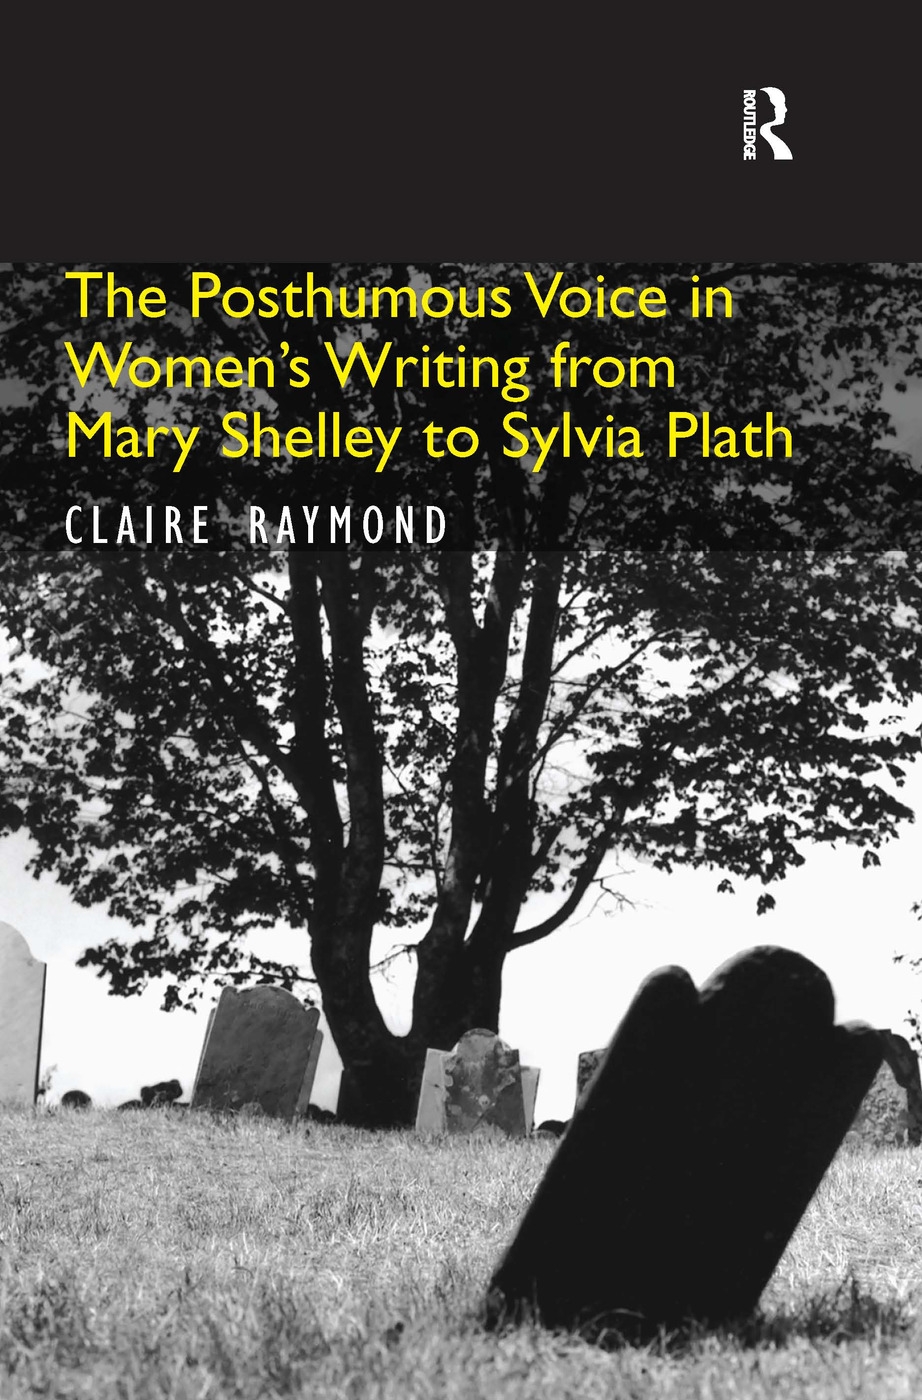 The Posthumous Voice in Women’s Writing from Mary Shelley to Sylvia Plath